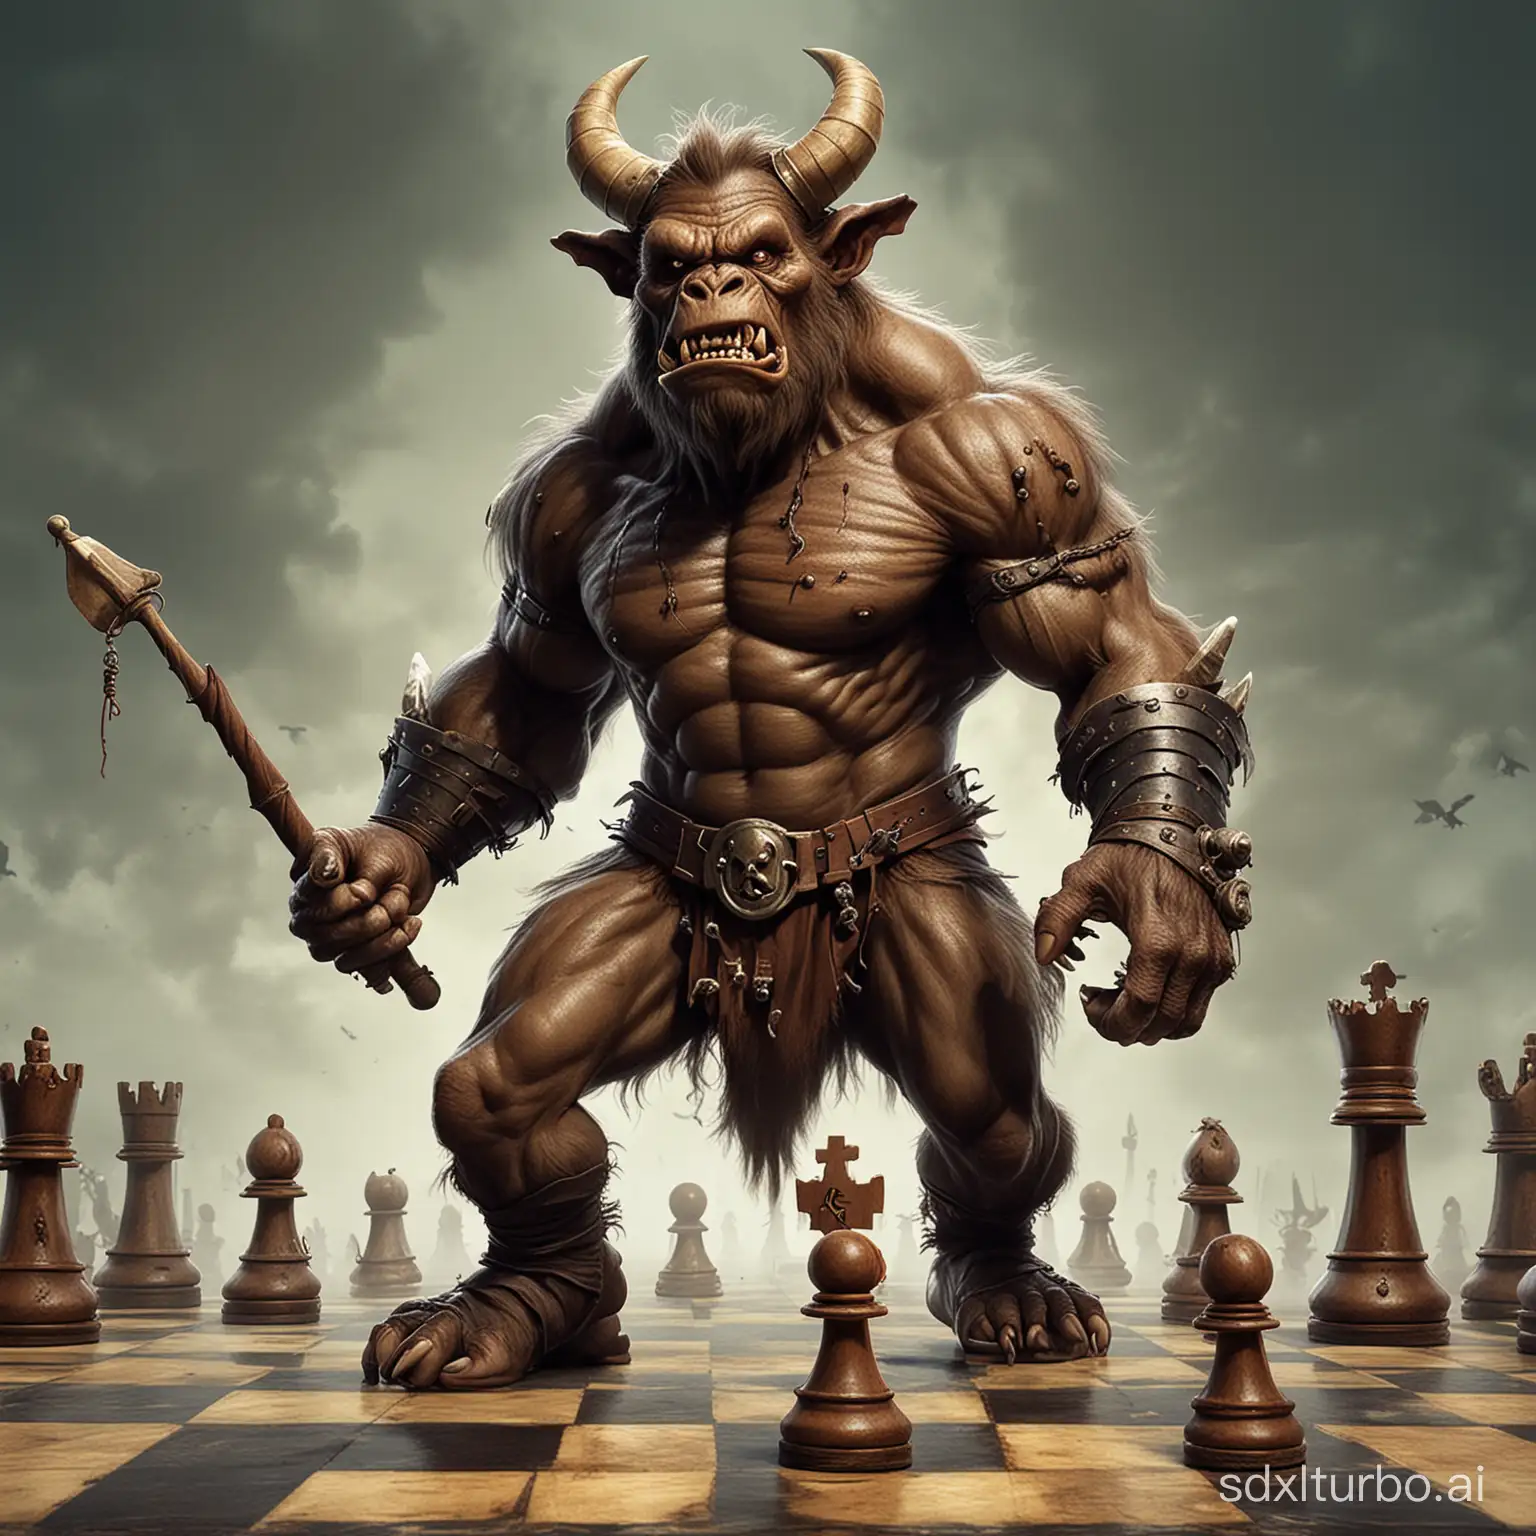 Fantasy-Chess-Match-with-a-Kong-Quidditch-Minotaur-and-Zombie